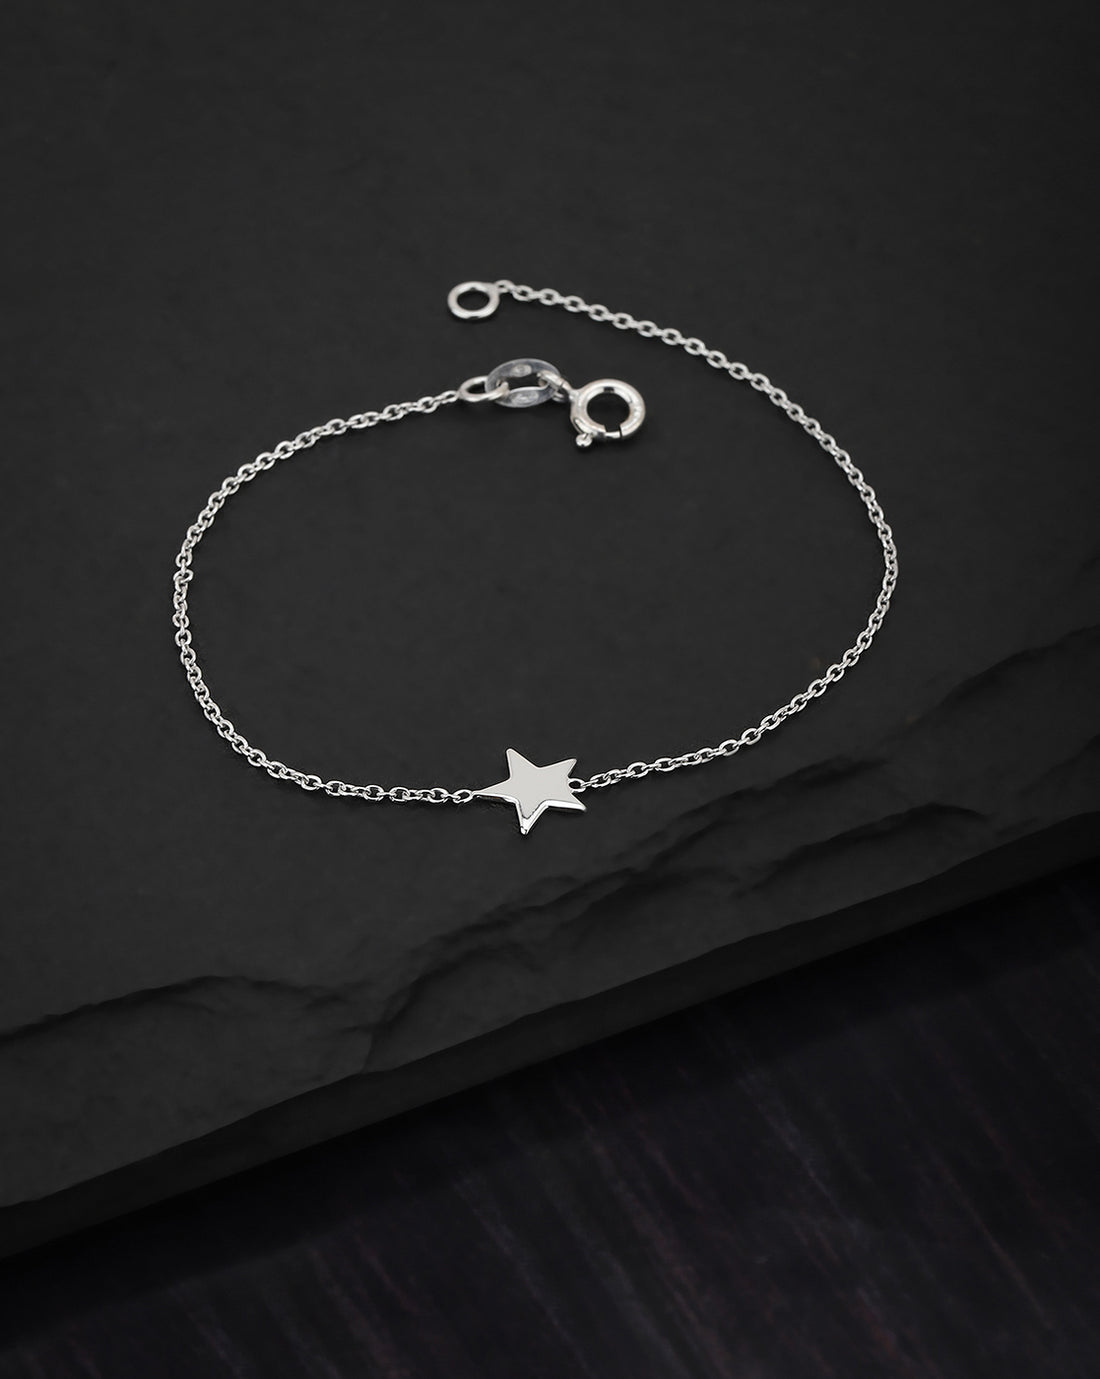 Carlton London 925 Sterling Silver Rhodium Plated with  Star Charm Bracelet